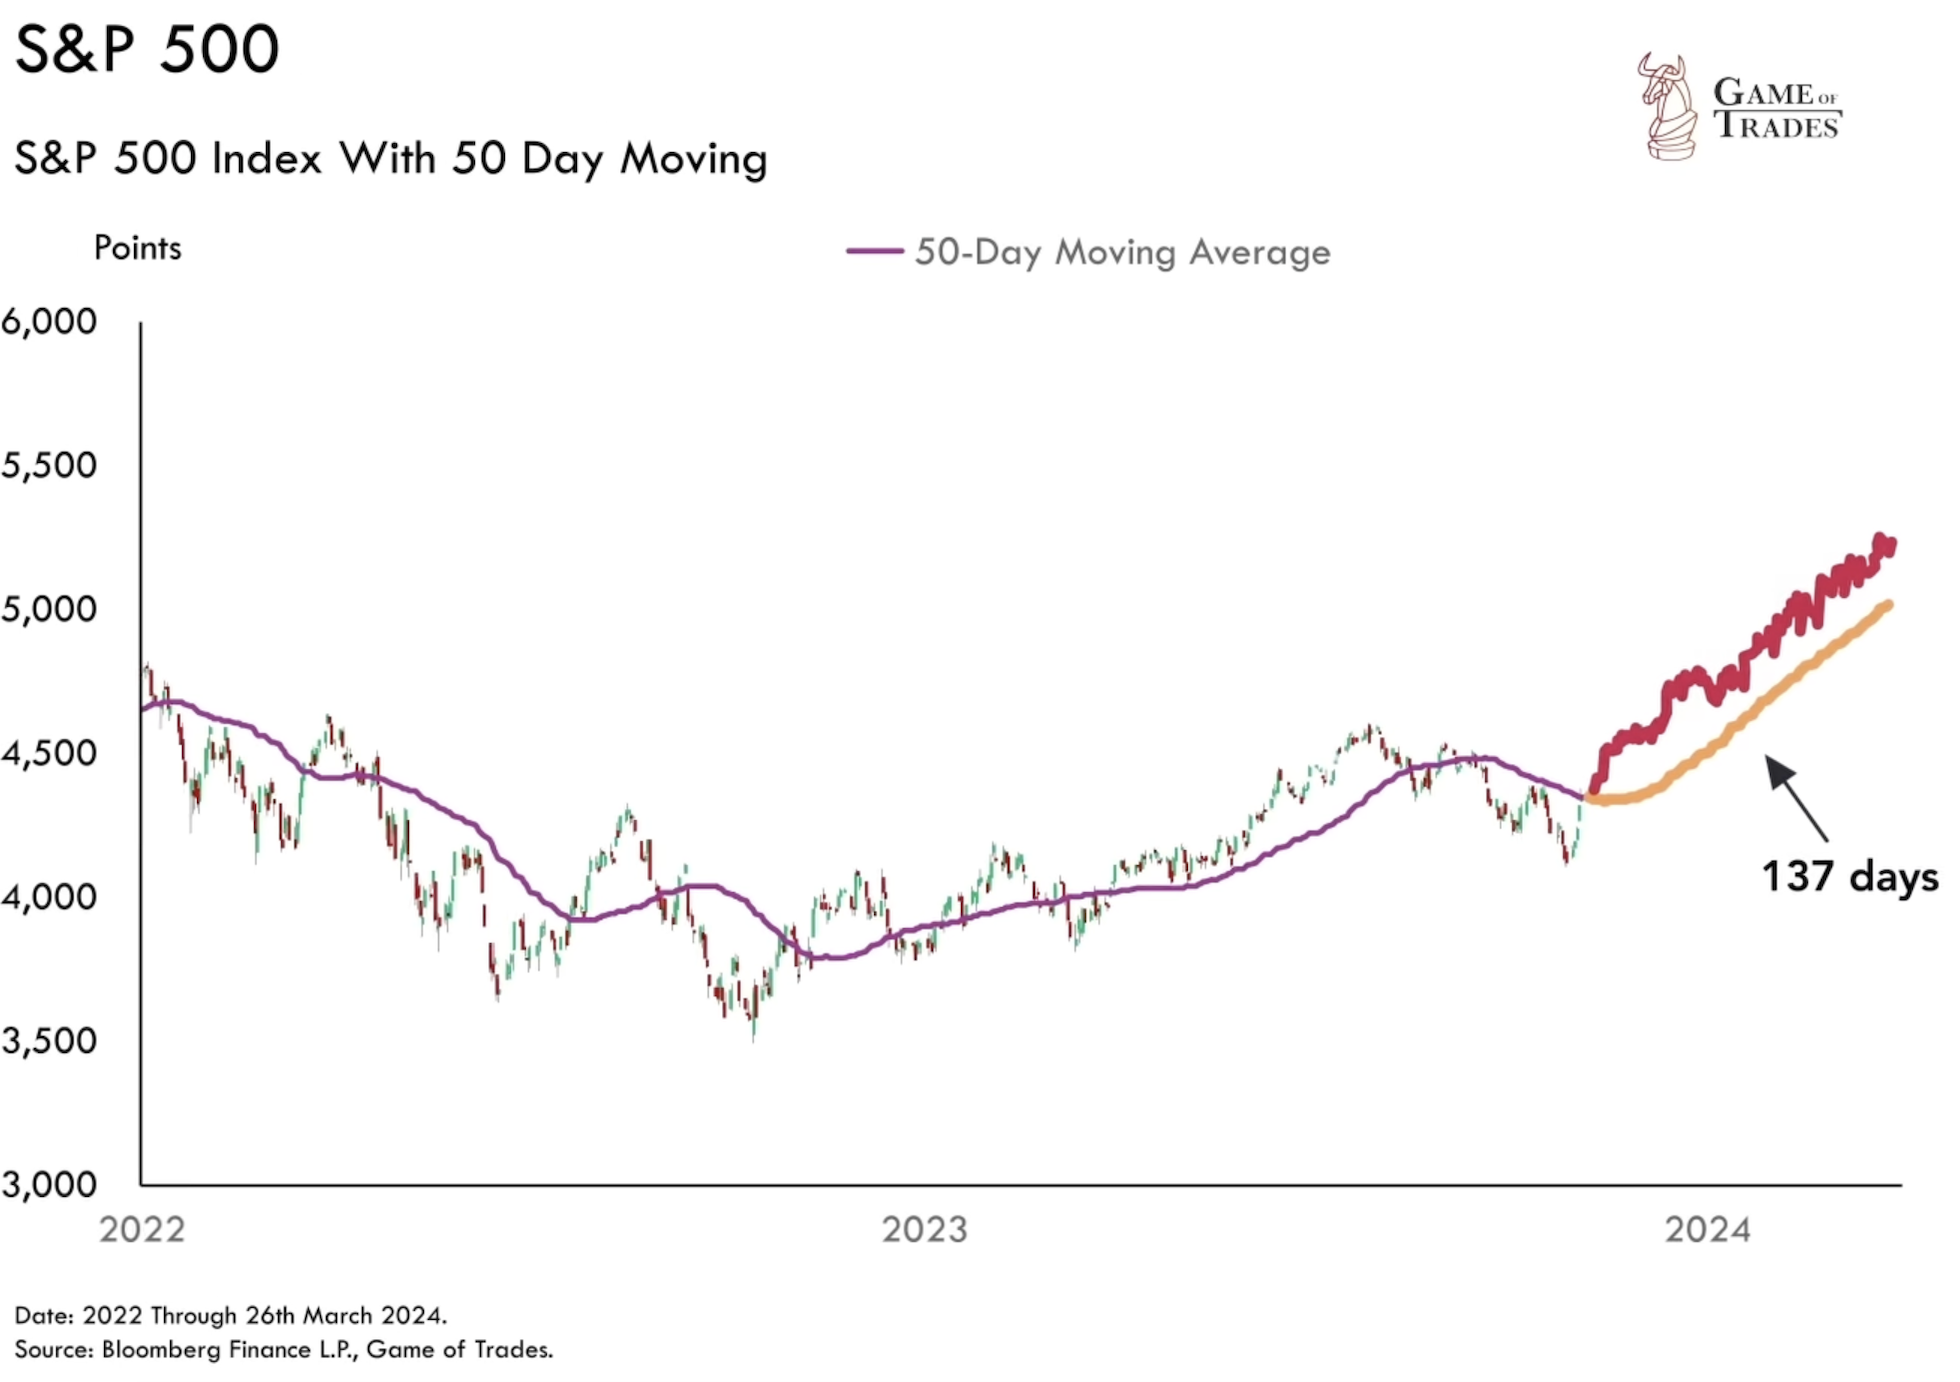 S&P 500 Index with 50 day moving